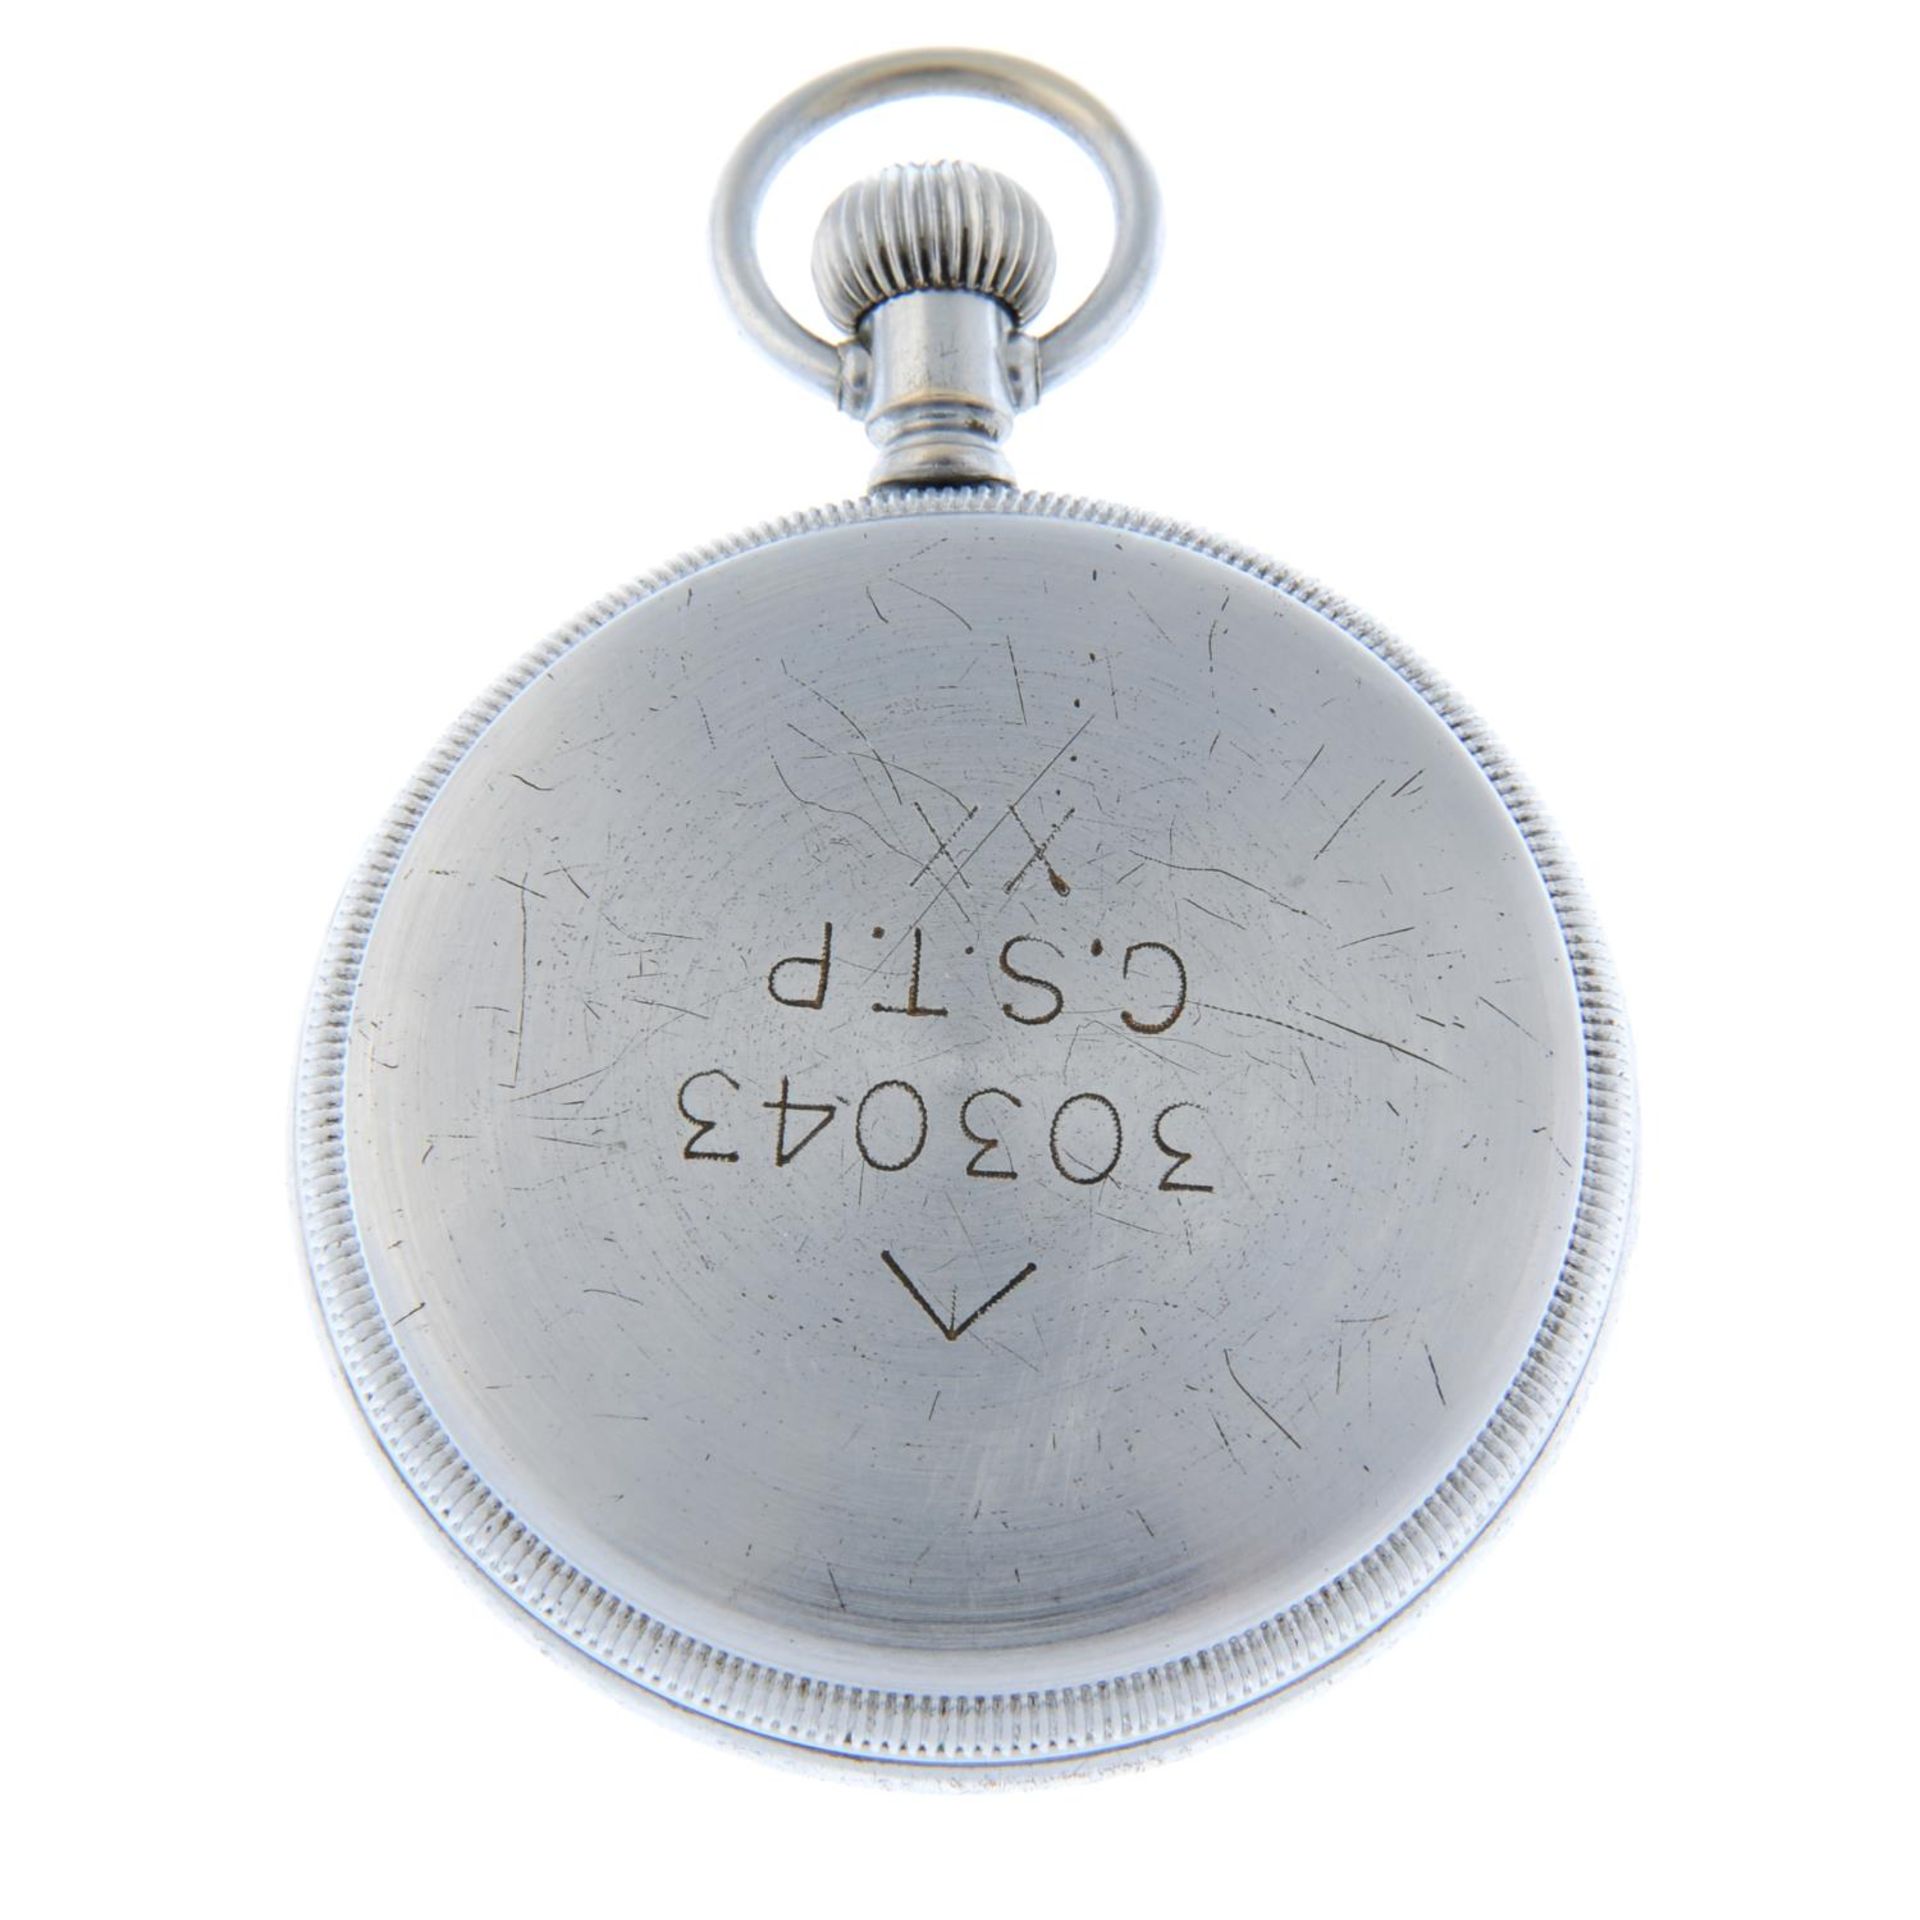 A military issue open face pocket watch by Elgin. - Image 2 of 2